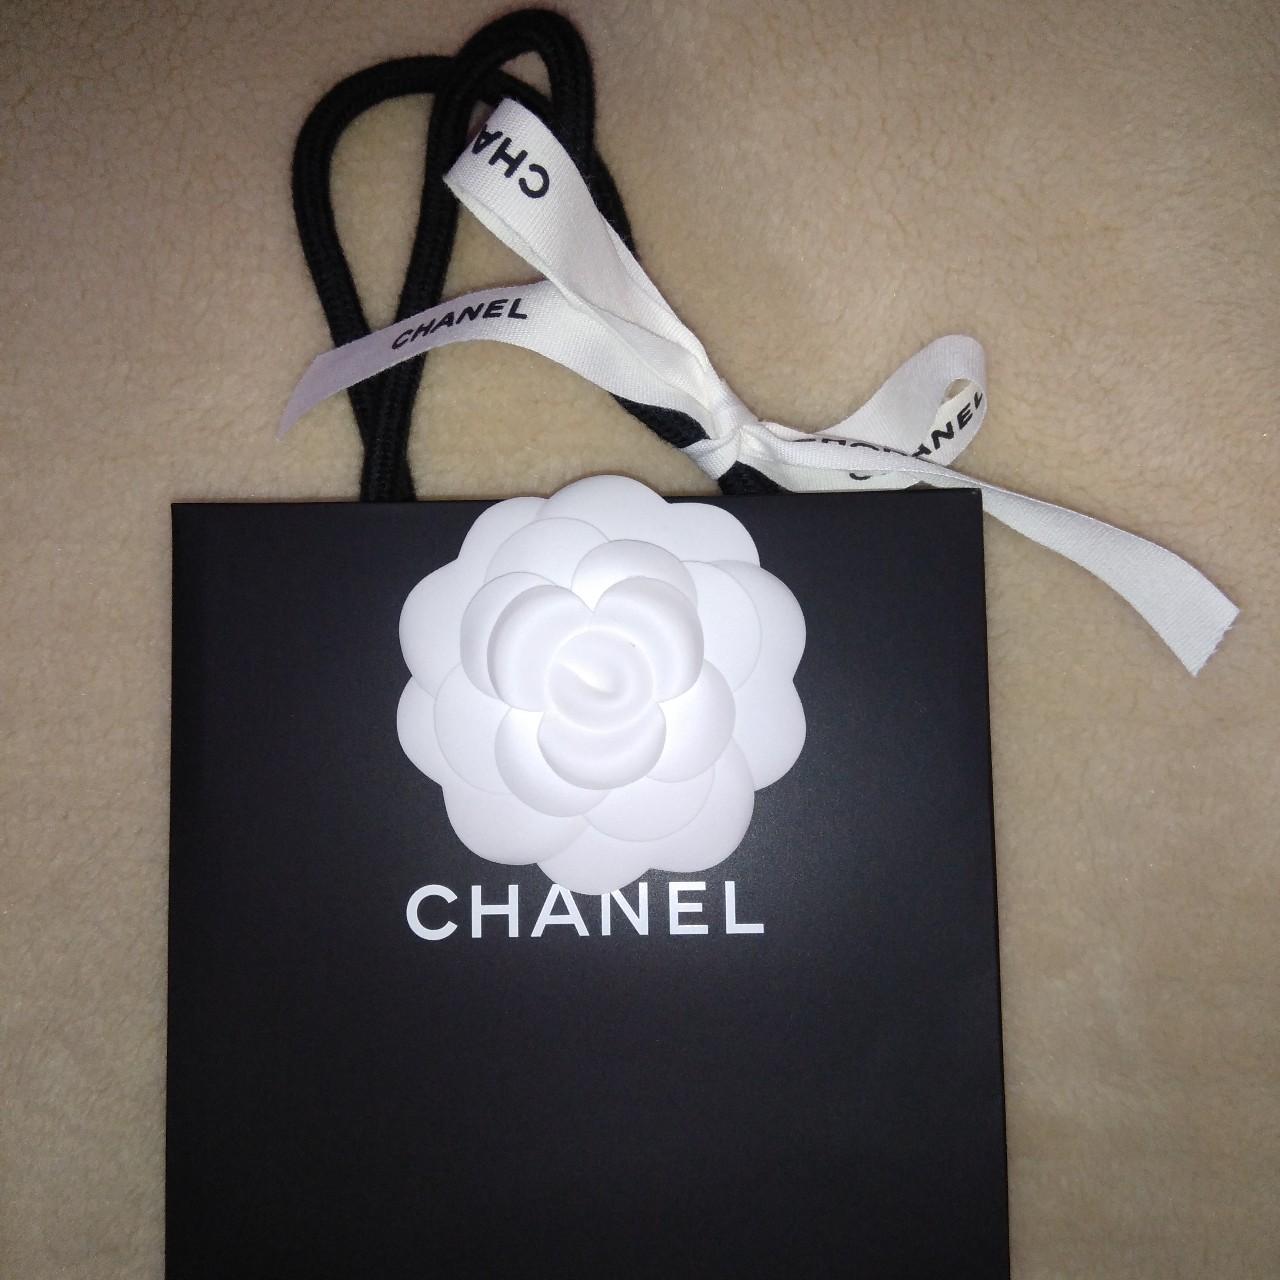 Chanel Ribbon/100% Authentic Black Chanel Ribbon With White 